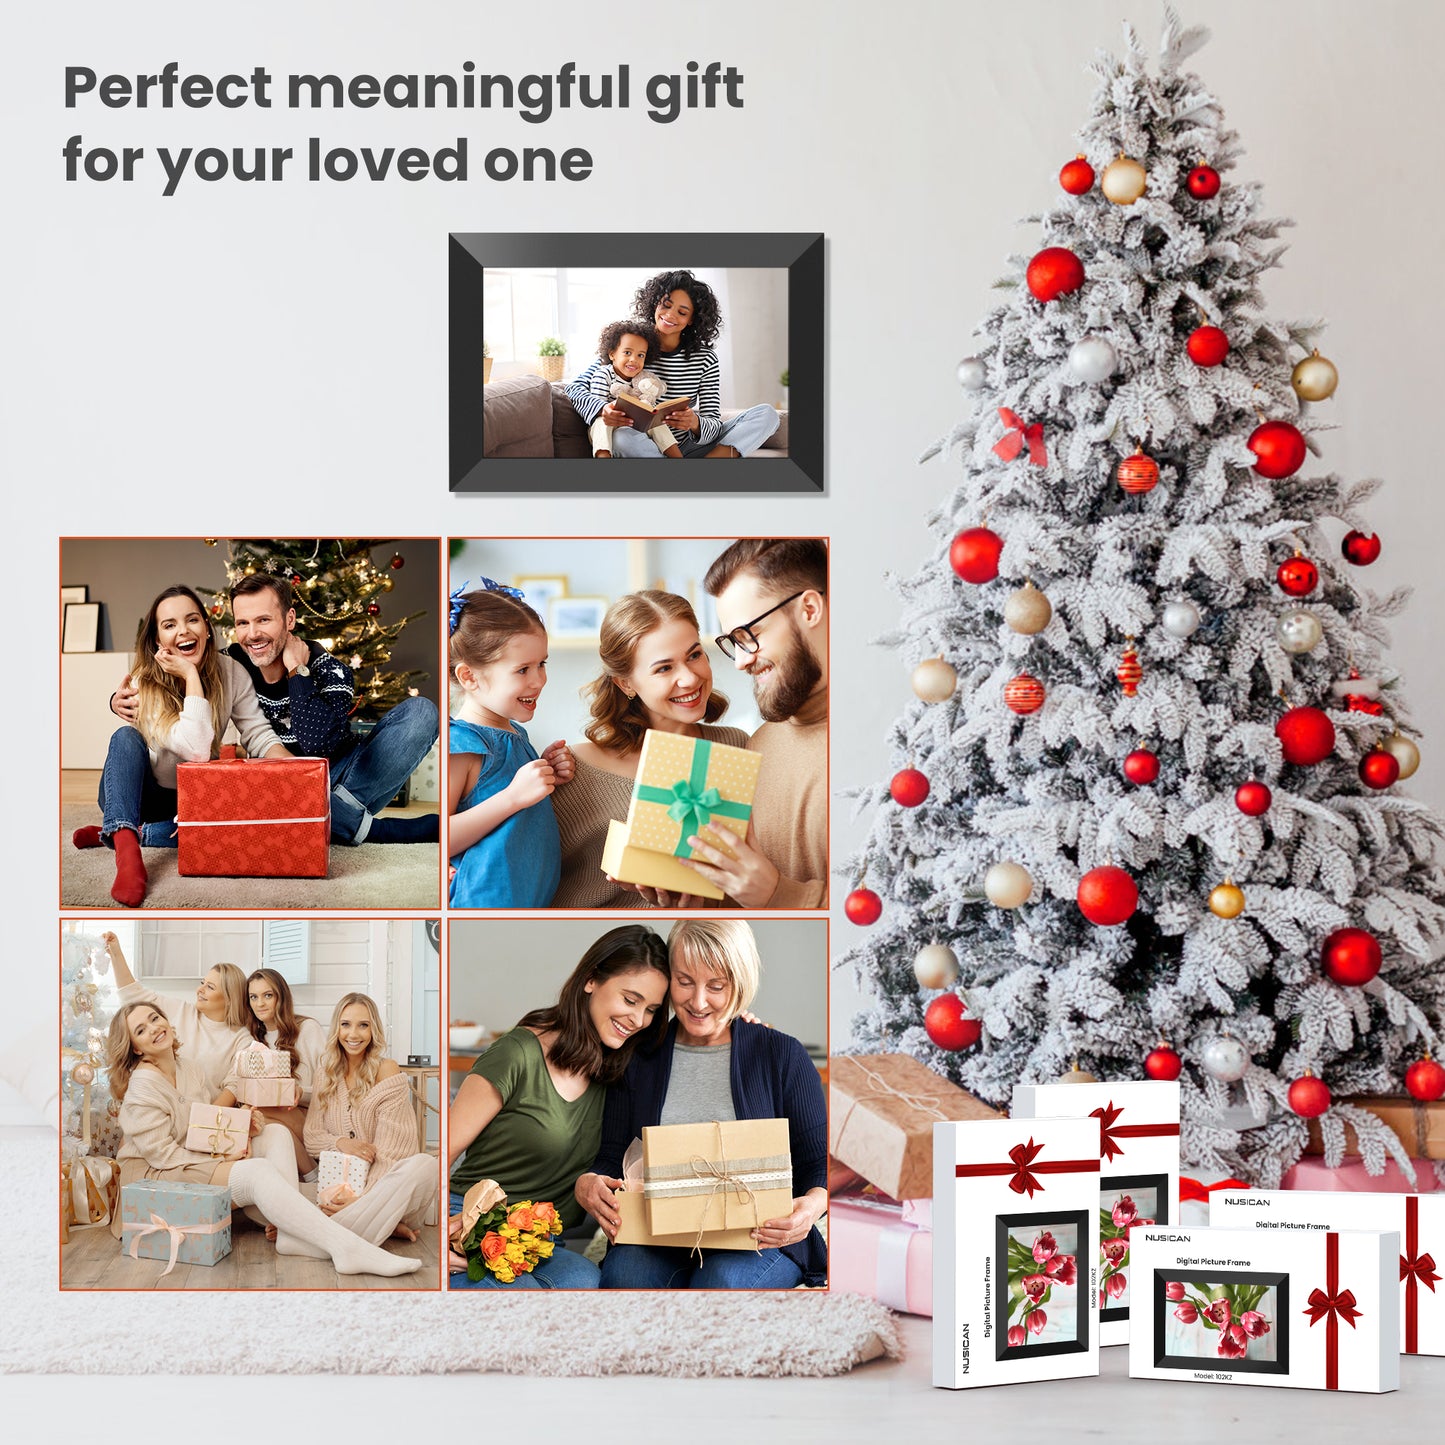 WiFi Digital Photo Frame, Nusican 10.1 Inch IPS Touch Screen Electric Smart Picture Frame 32G Storage, 4 Pack WiFi Photo Frame with Wifi Share Photo Video via Free App Anytime , Best Holiday Gifts !